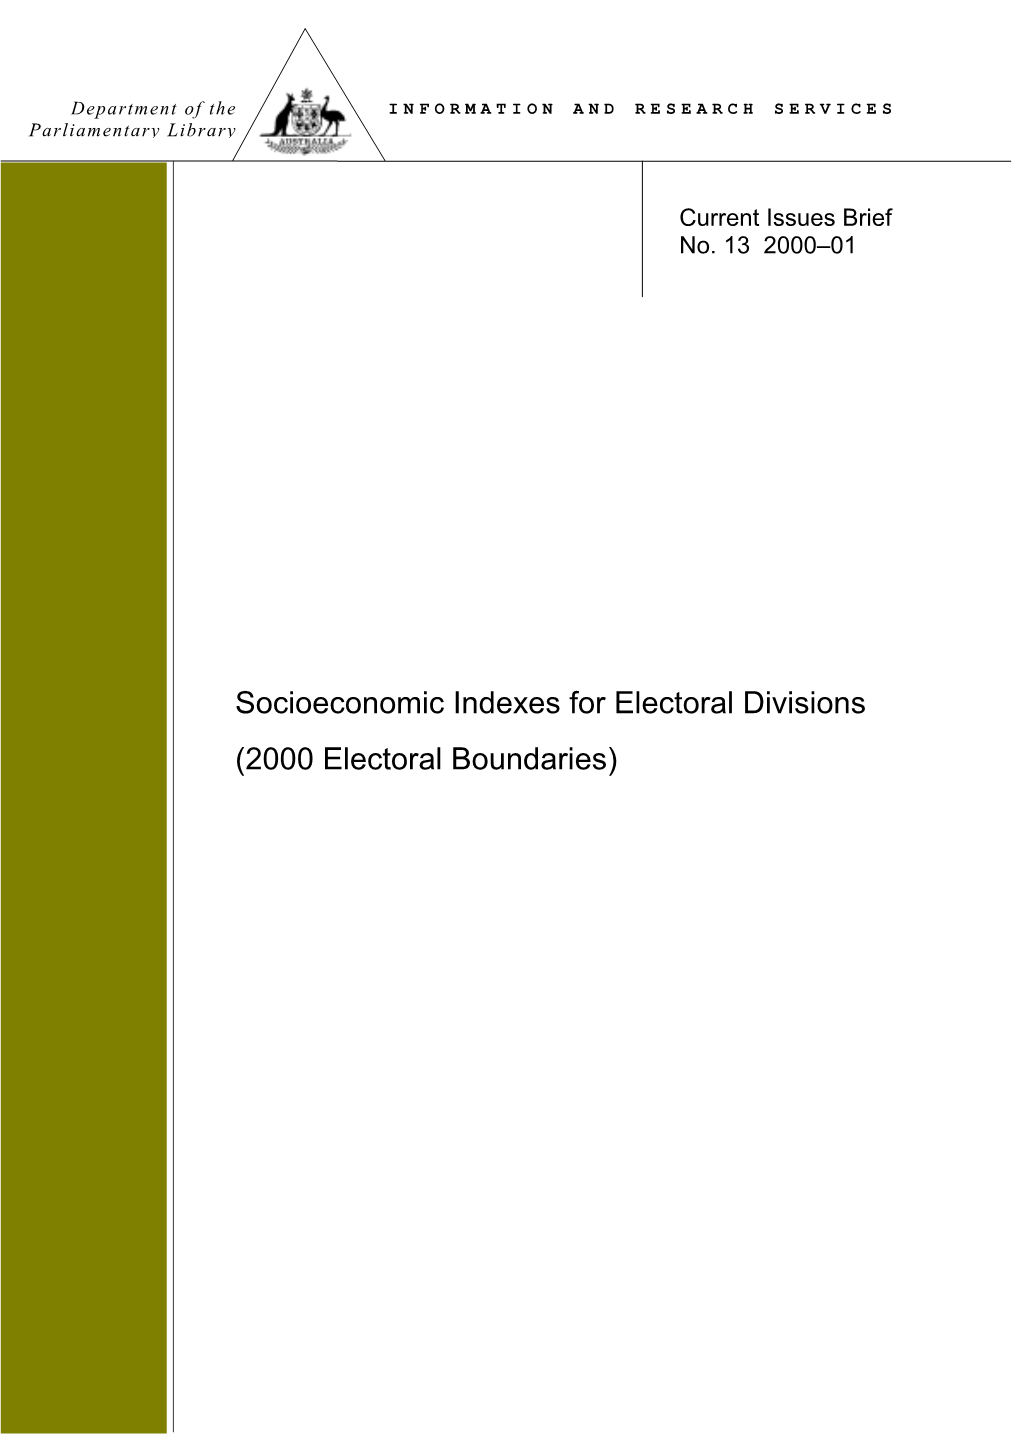 Socioeconomic Indexes for Electoral Divisions (2000 Electoral Boundaries) ISSN 1440-2009